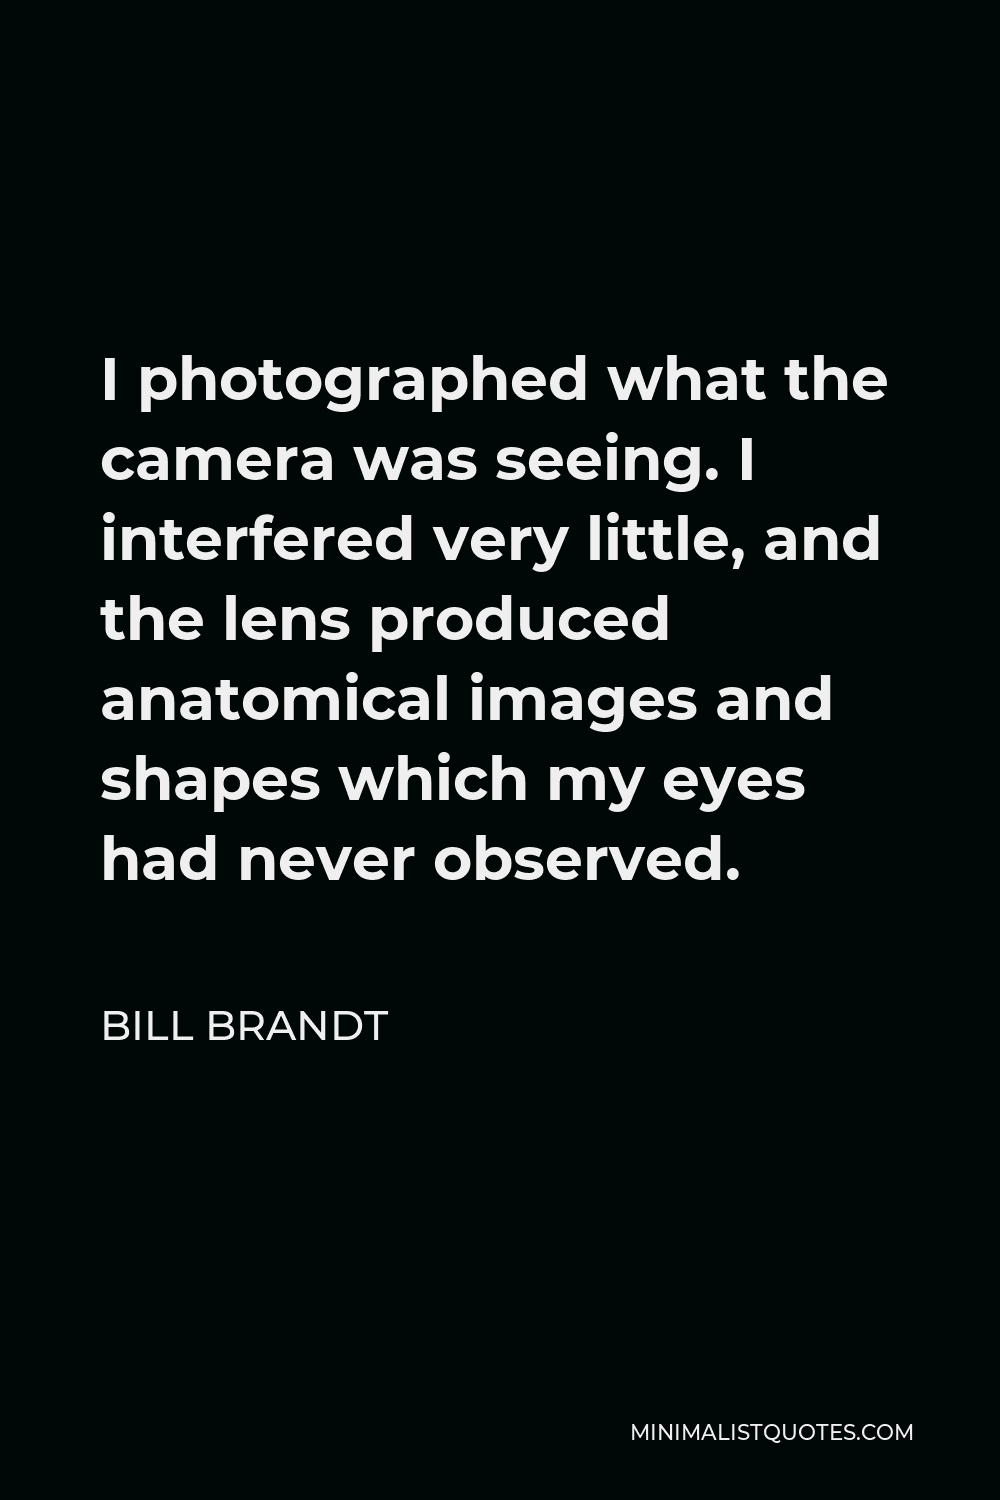 Bill Brandt Quote - I photographed what the camera was seeing. I interfered very little, and the lens produced anatomical images and shapes which my eyes had never observed.